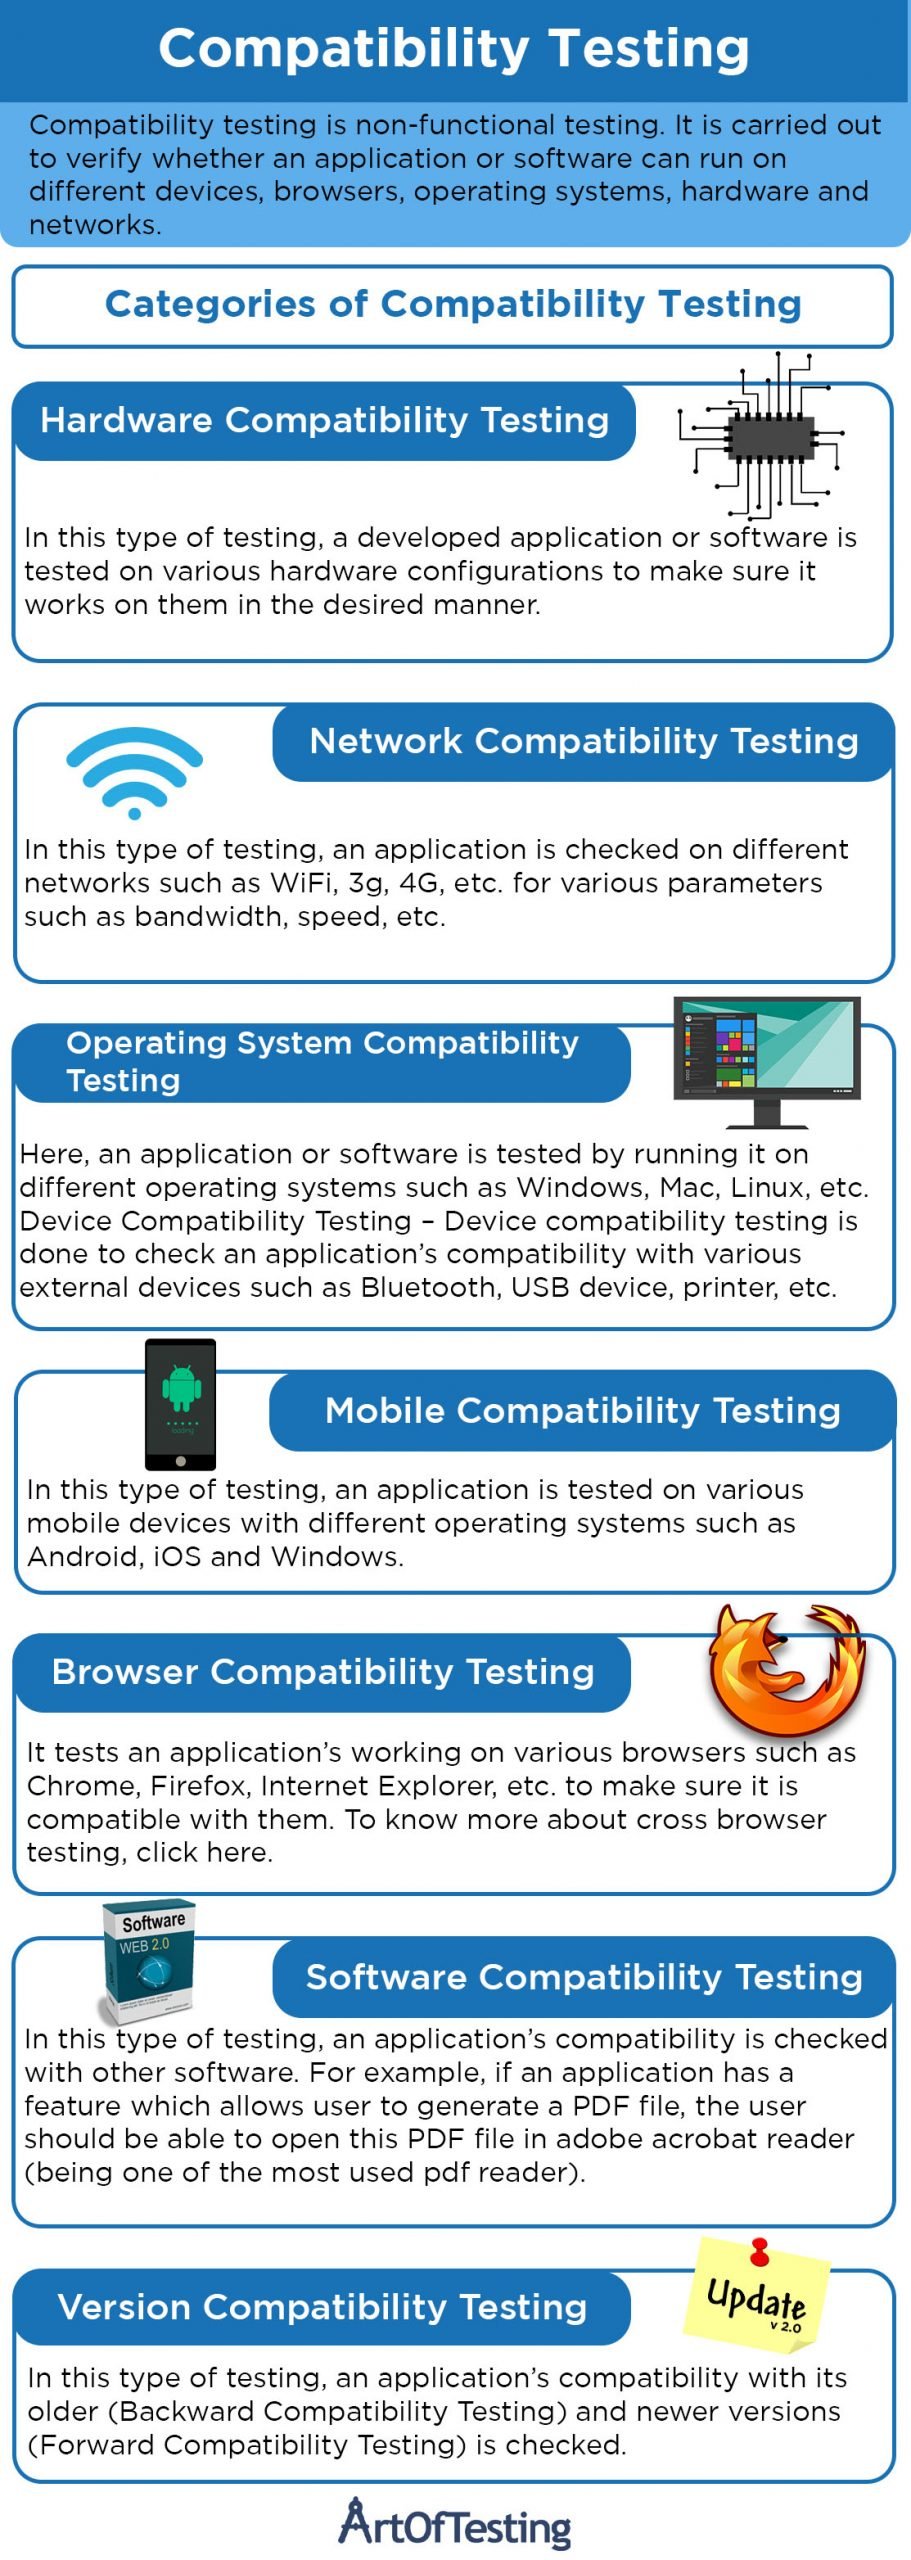 Compatibility: Check the system requirements and compatibility information to ensure basstreblebooster.exe is compatible with your Windows version and hardware specifications.
Online support: Contact the dedicated support team via email or live chat for personalized assistance and prompt resolution of any issues you may encounter.